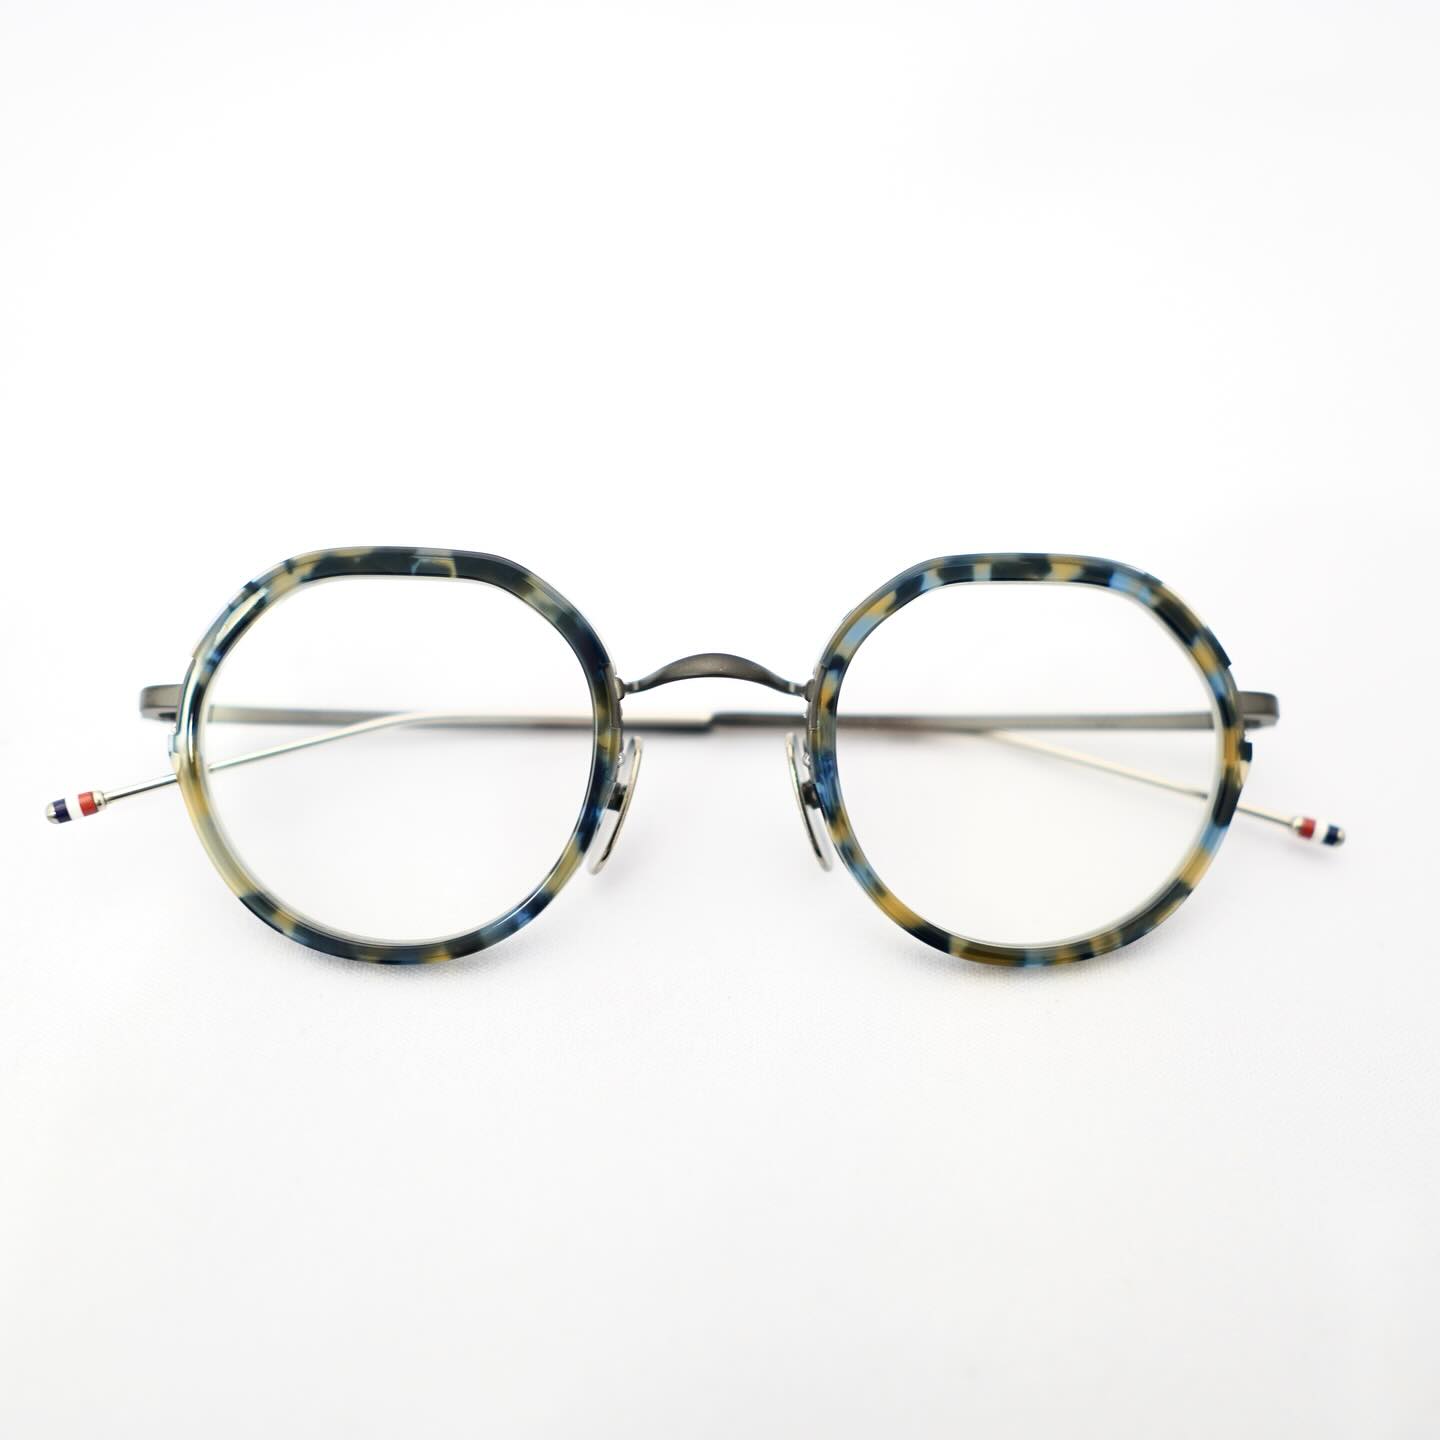 brand:THOM BROWNE
mod:UEO911A
col:416(Navy  Melange Tortoise)

THOM BROWNEから人気モデルが入荷してきました！

ネイビーのべっ甲柄にガンメタルのチタンを掛け合わせたコンビネーションフレームです。

小ぶりなレンズシェイプですのでお顔の小さい方や女性のお客様にもおすすめです。

是非店頭でお試しください！

商品に関するお問い合わせはDM、お電話、メールでも受付しておりますのでお気軽に問い合わせください。

︎shop data︎
最寄り駅 自由が丘
正面口出口から歩いて約５分です。
住所 152-0035
東京都目黒区自由が丘1-16-13ヒルズ自由が丘1F
︎03-5731-6612
info＠beauxyeux.jp

Popular models have arrived from THOM BROWNE!

A combination frame with a navy tortoiseshell pattern and gunmetal titanium.

The small lens shape makes it recommended for people with small faces and for women.

Please try it in store!

For inquiries regarding products, please feel free to contact us by DM, phone, or email.

︎ shop information︎
SHOP beauxyeux Jiyugaoka
ZIPCODE 152-0035
1F Hills Jiyugaoka 1-16-13
Jiyugaoka Meguro-ku Tokyo JAPAN
︎+81-35731-6612
info@beauxyeux.jp

     #眼鏡店　
@beauxyeux_azabu
@beauxyeux_jiyugaoka 
@thombrowne